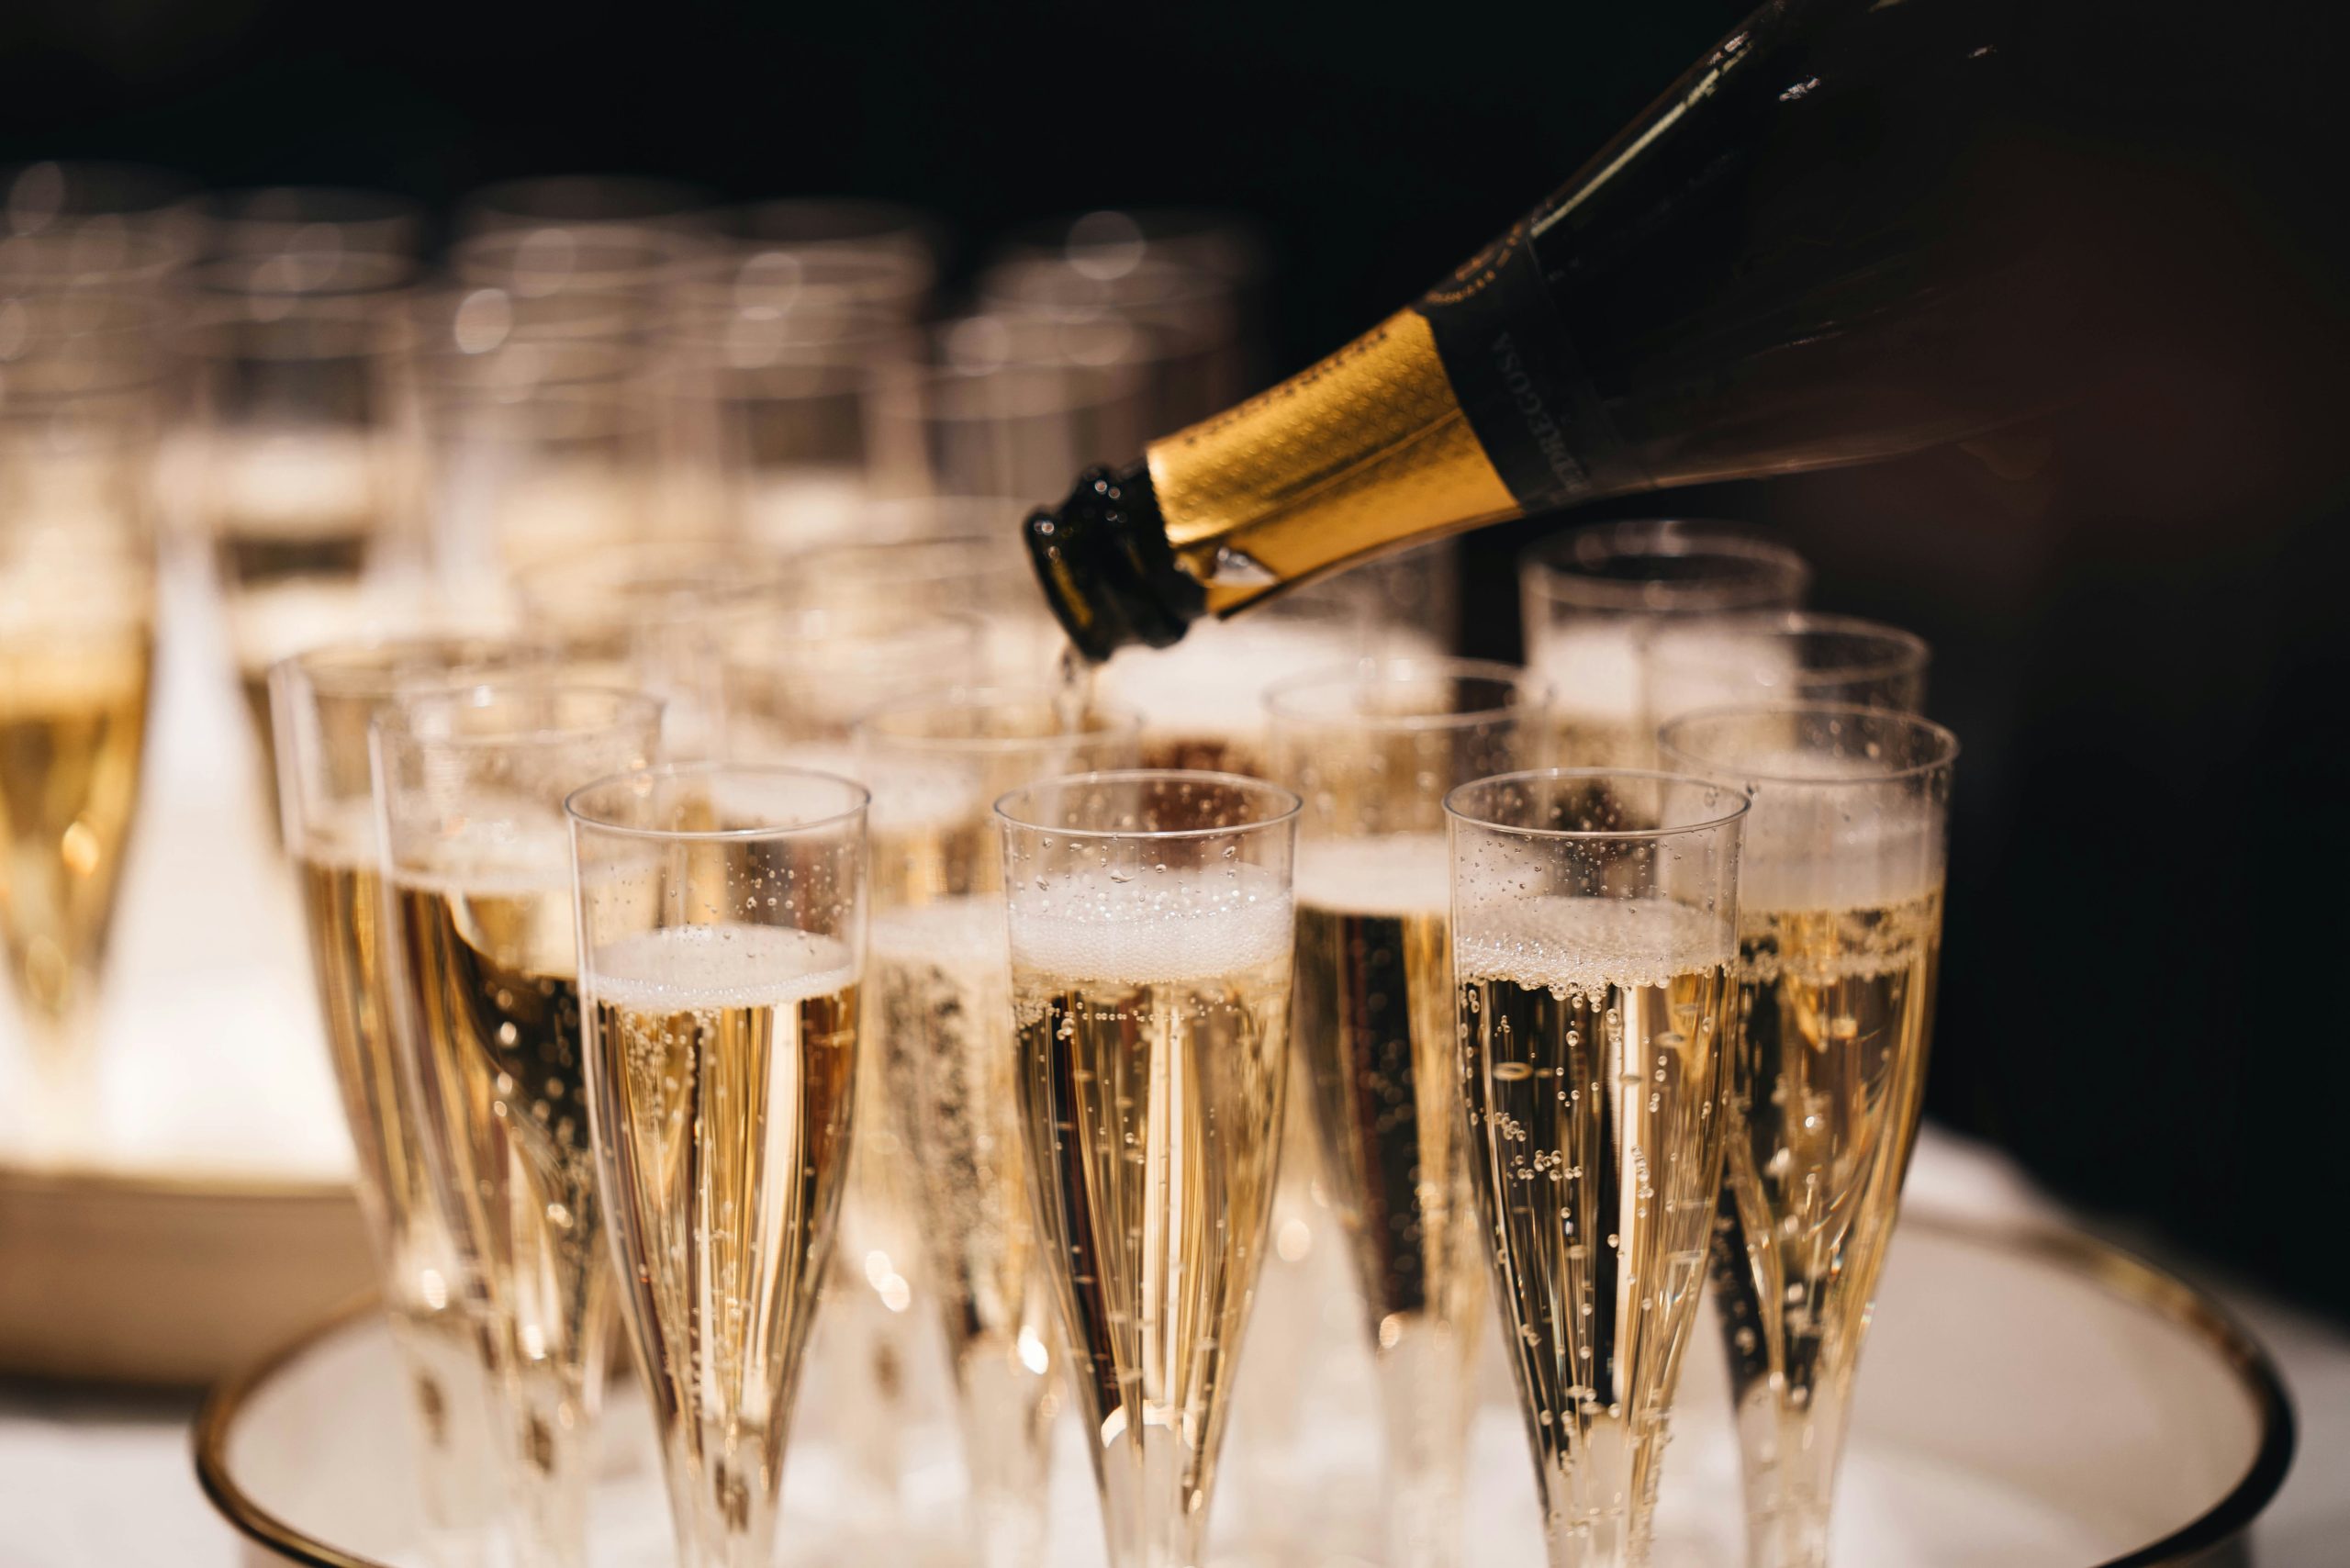 Why is champagne used for celebrations?